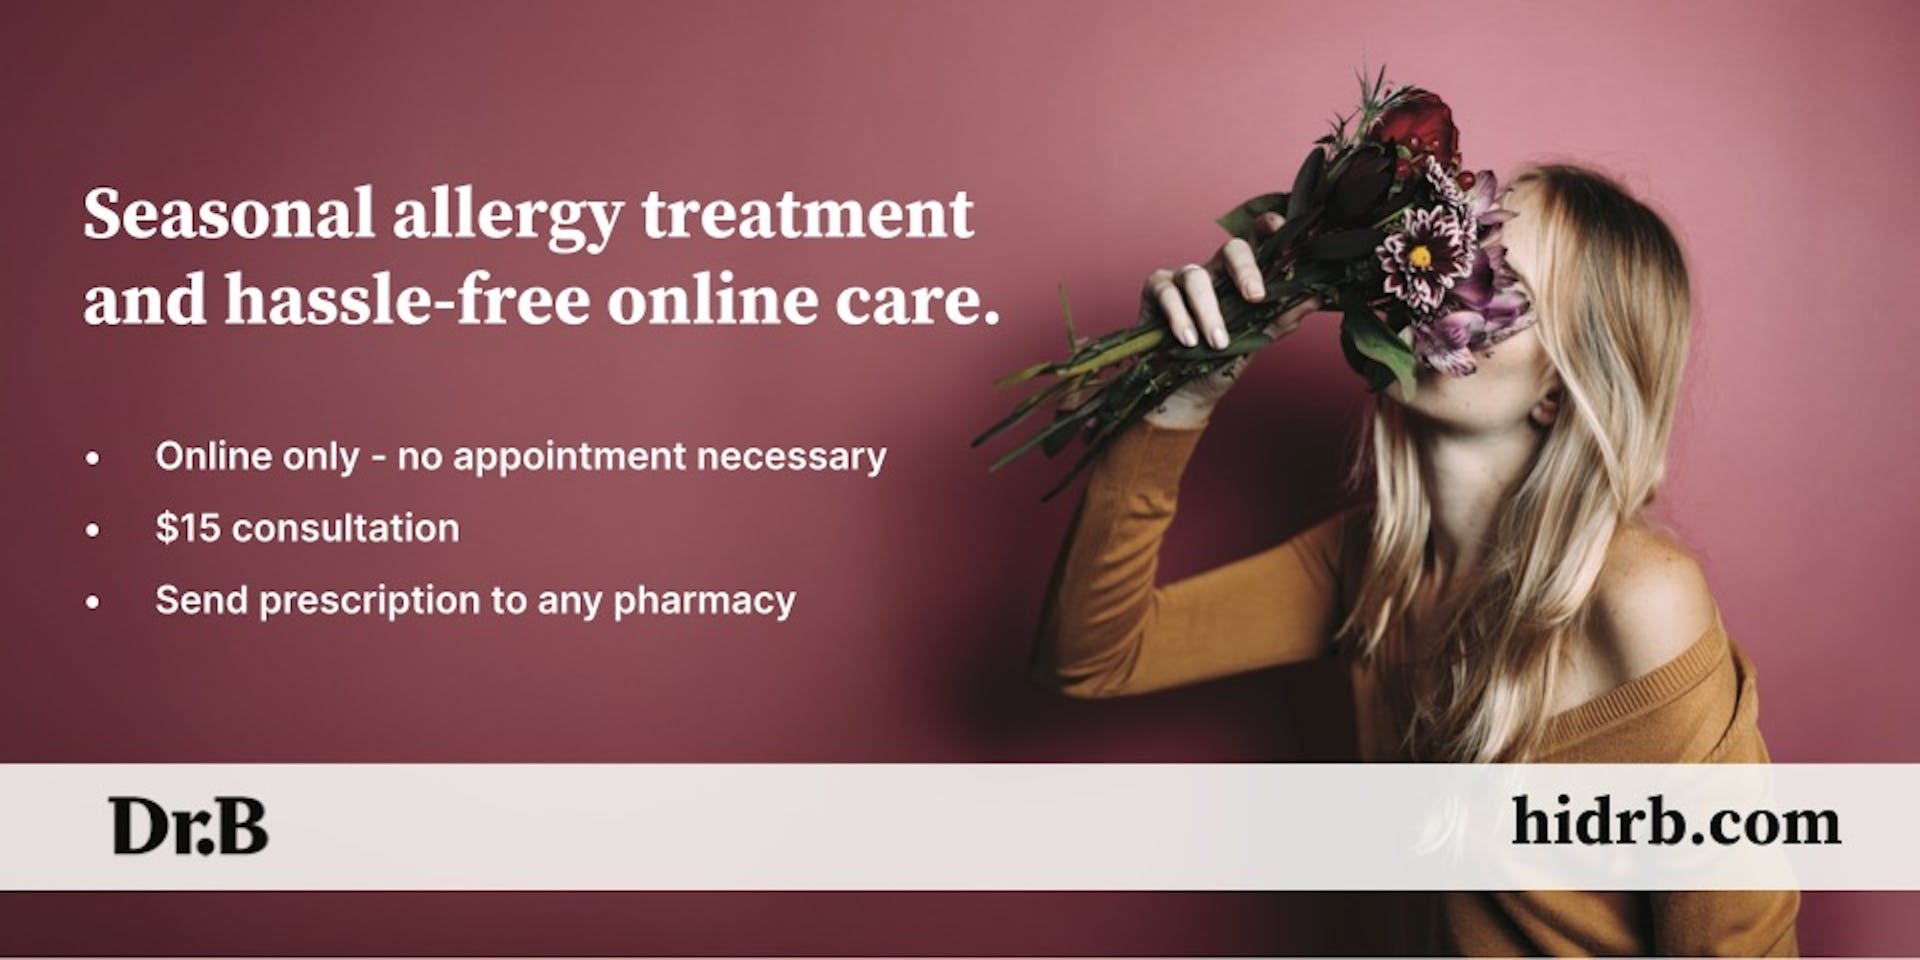 Banner advertising Dr. B's services for seasonal allergy treatments